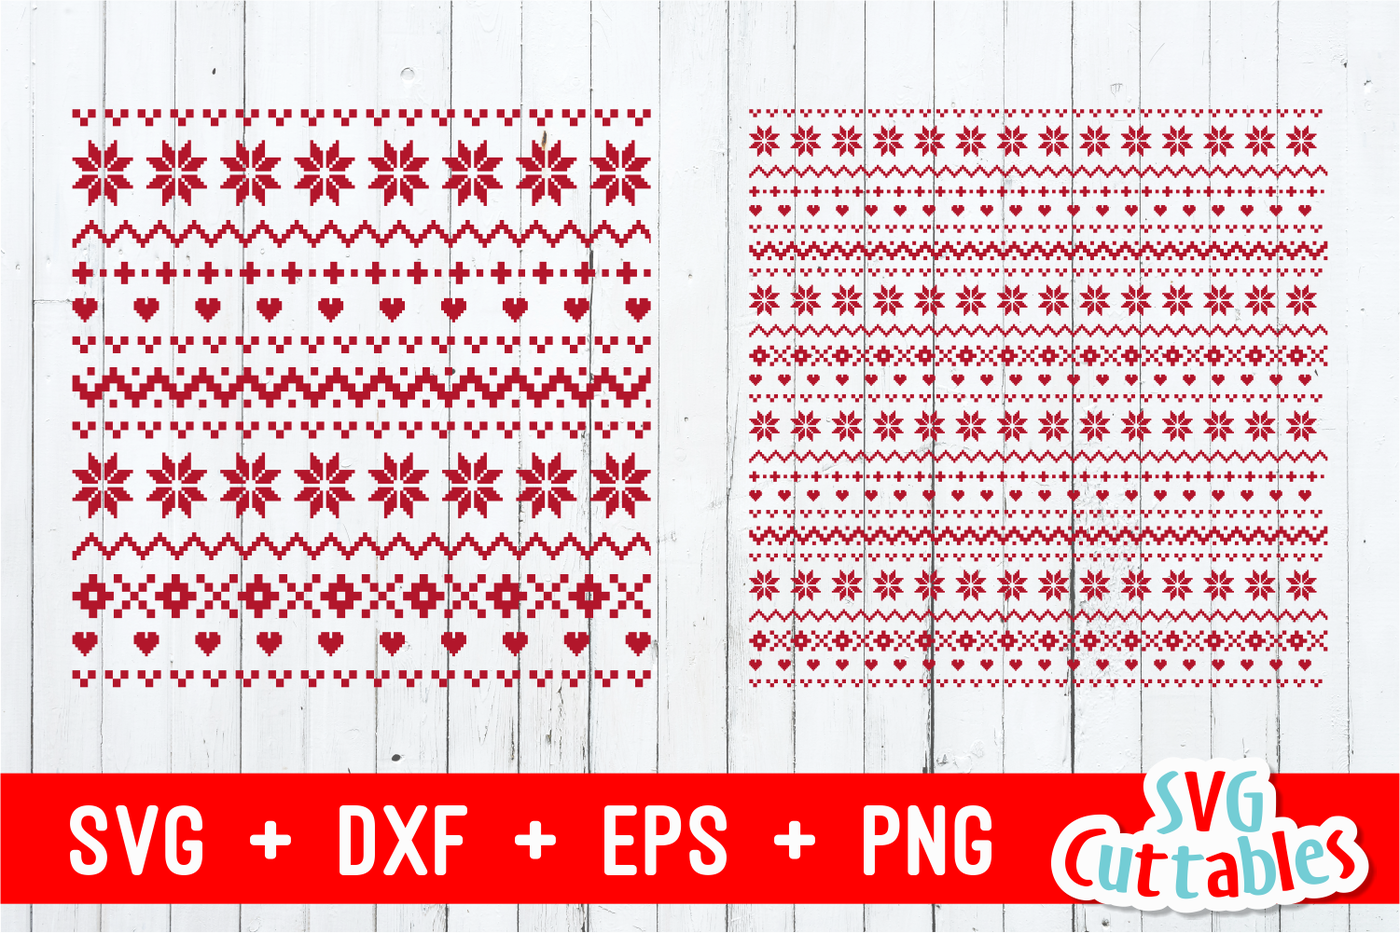 Christmas Sweater Pattern Svg Cut File By Svg Cuttables Thehungryjpeg Com